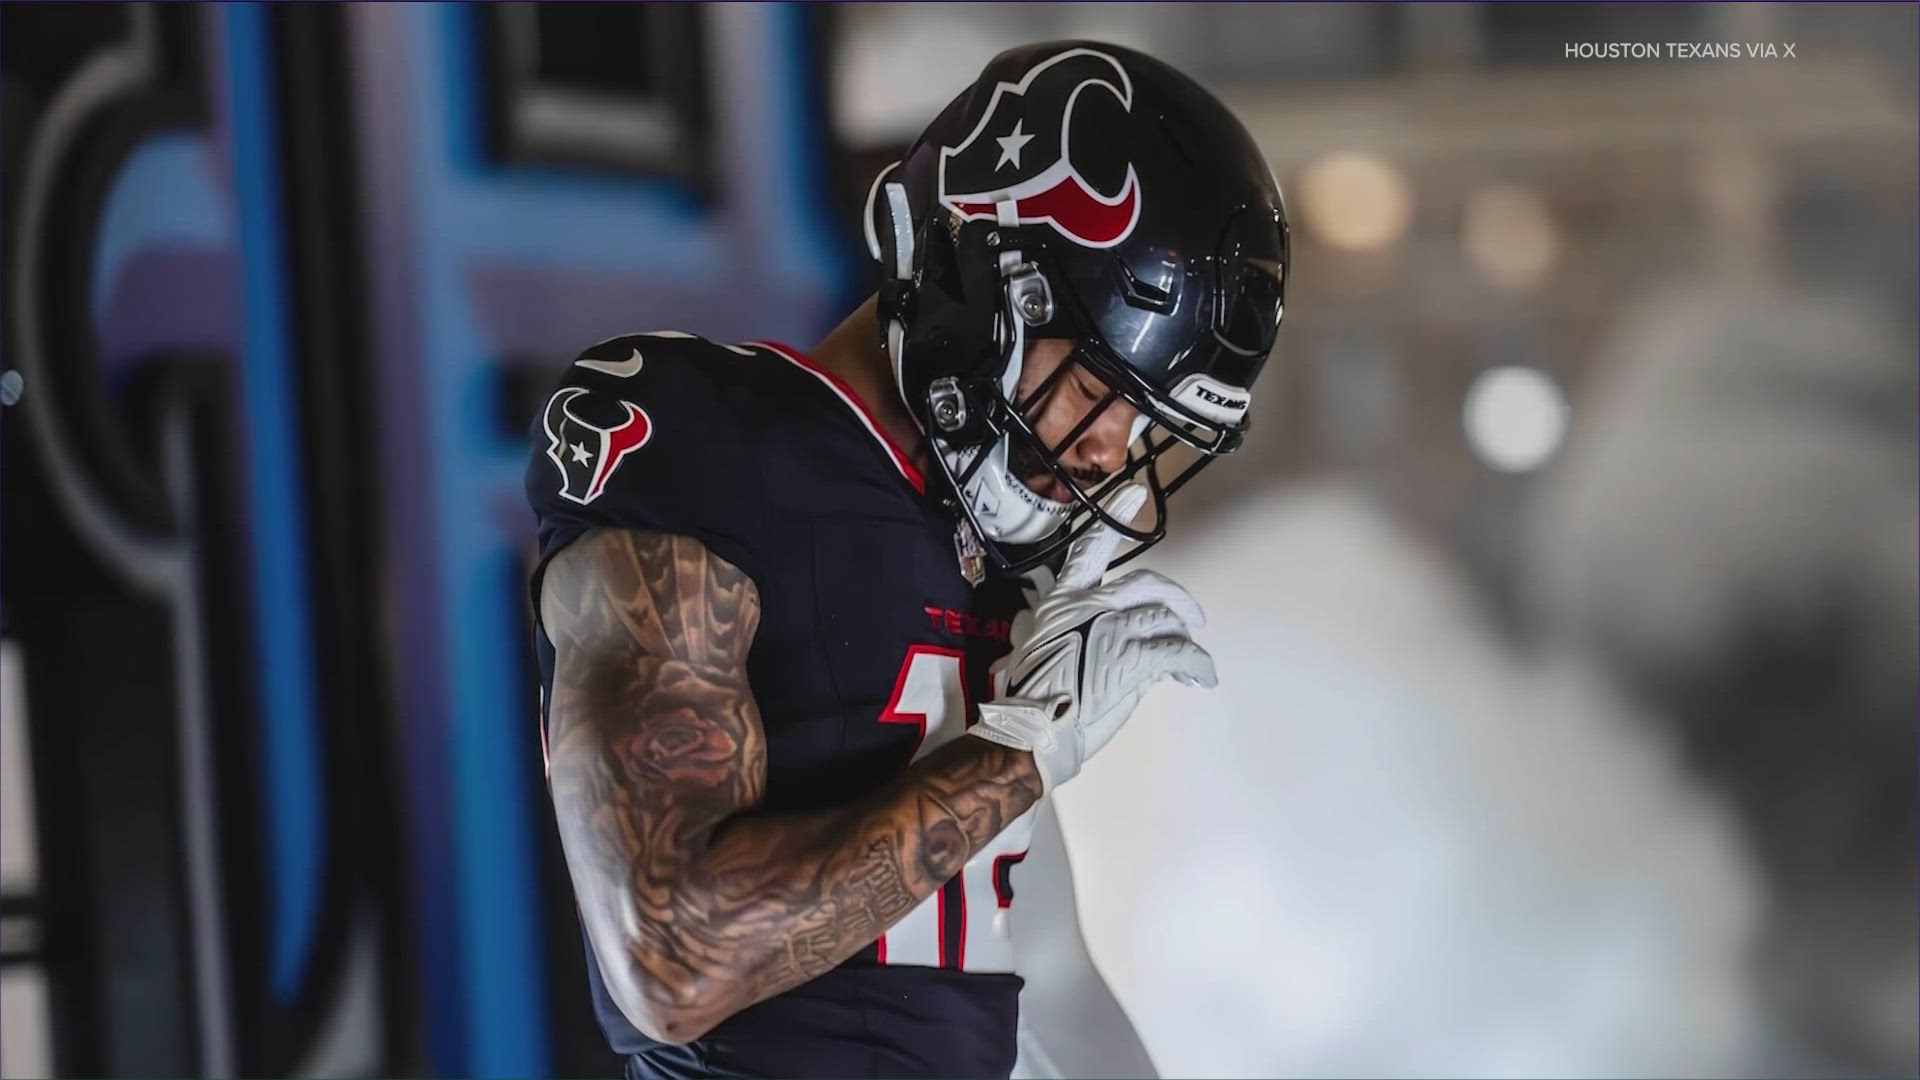 The Houston Texans will have new uniforms this fall.